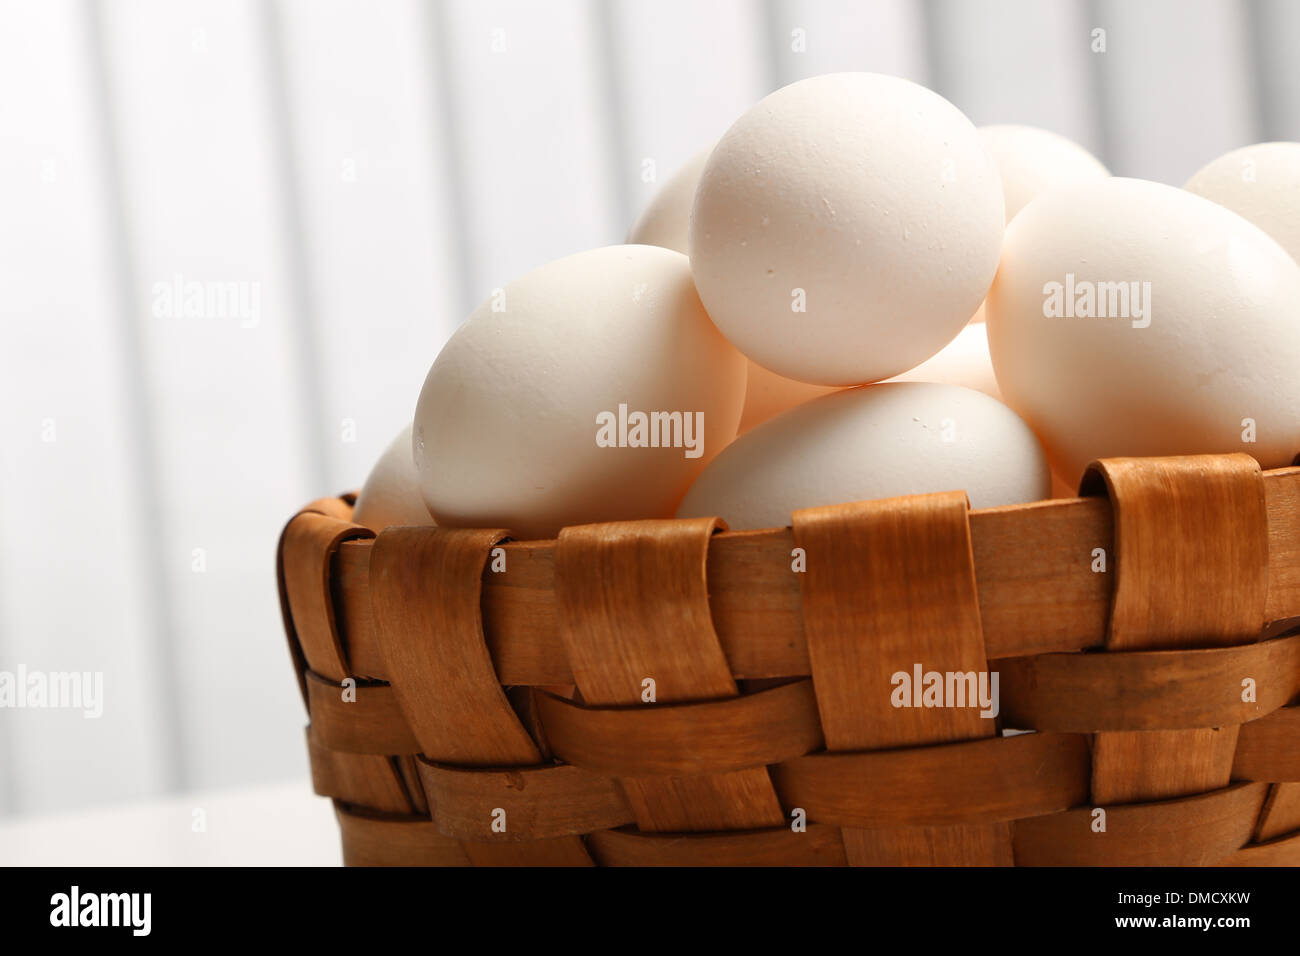 White eggs in a basket Stock Photo